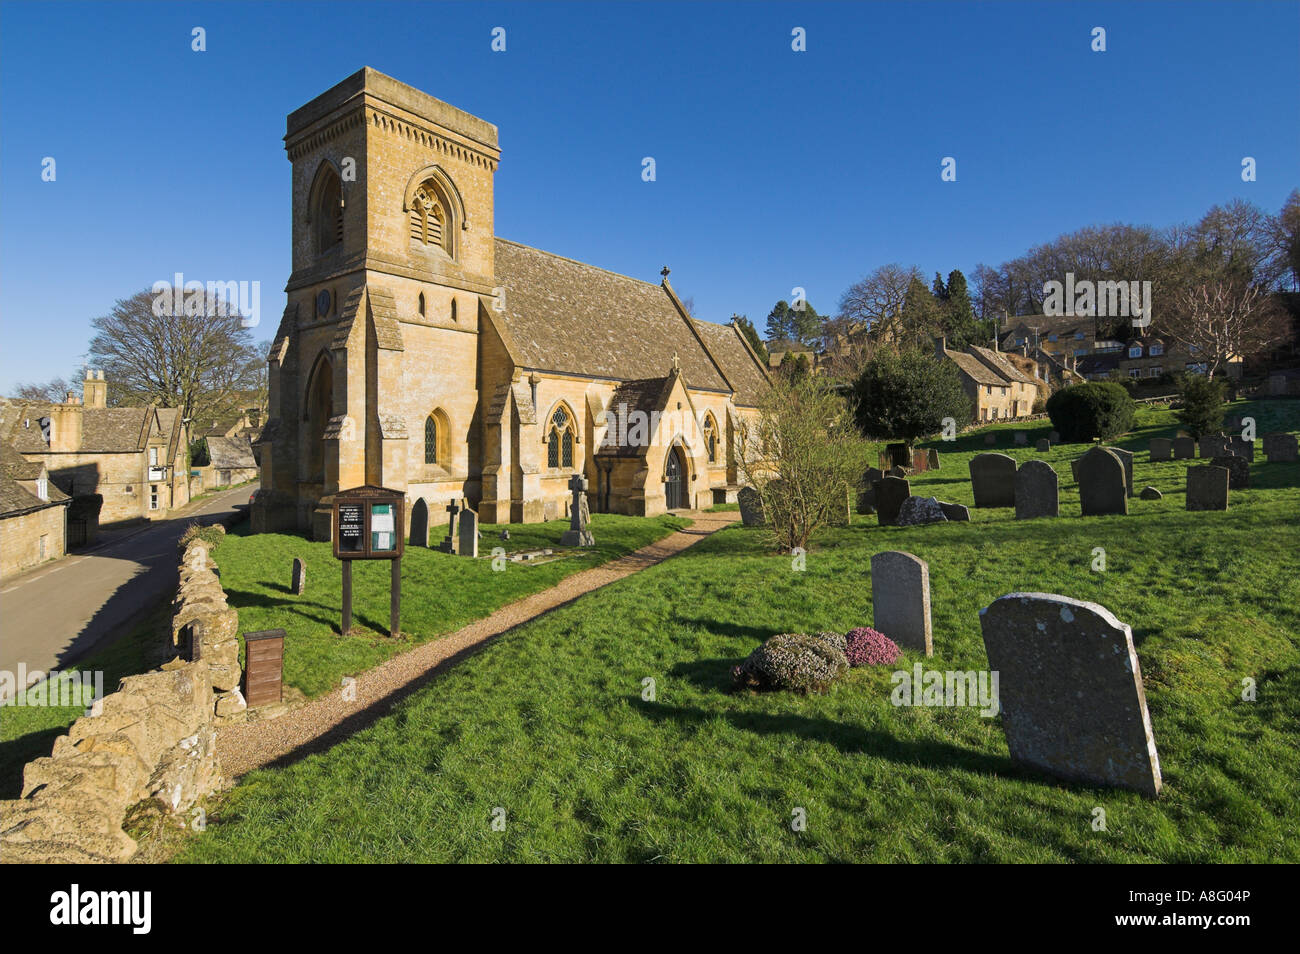 Cotswolds village of Snowshill with St Barnabas Church and churchyard Snowshill Gloucestershire The Cotswolds England UK GB Europe Stock Photo